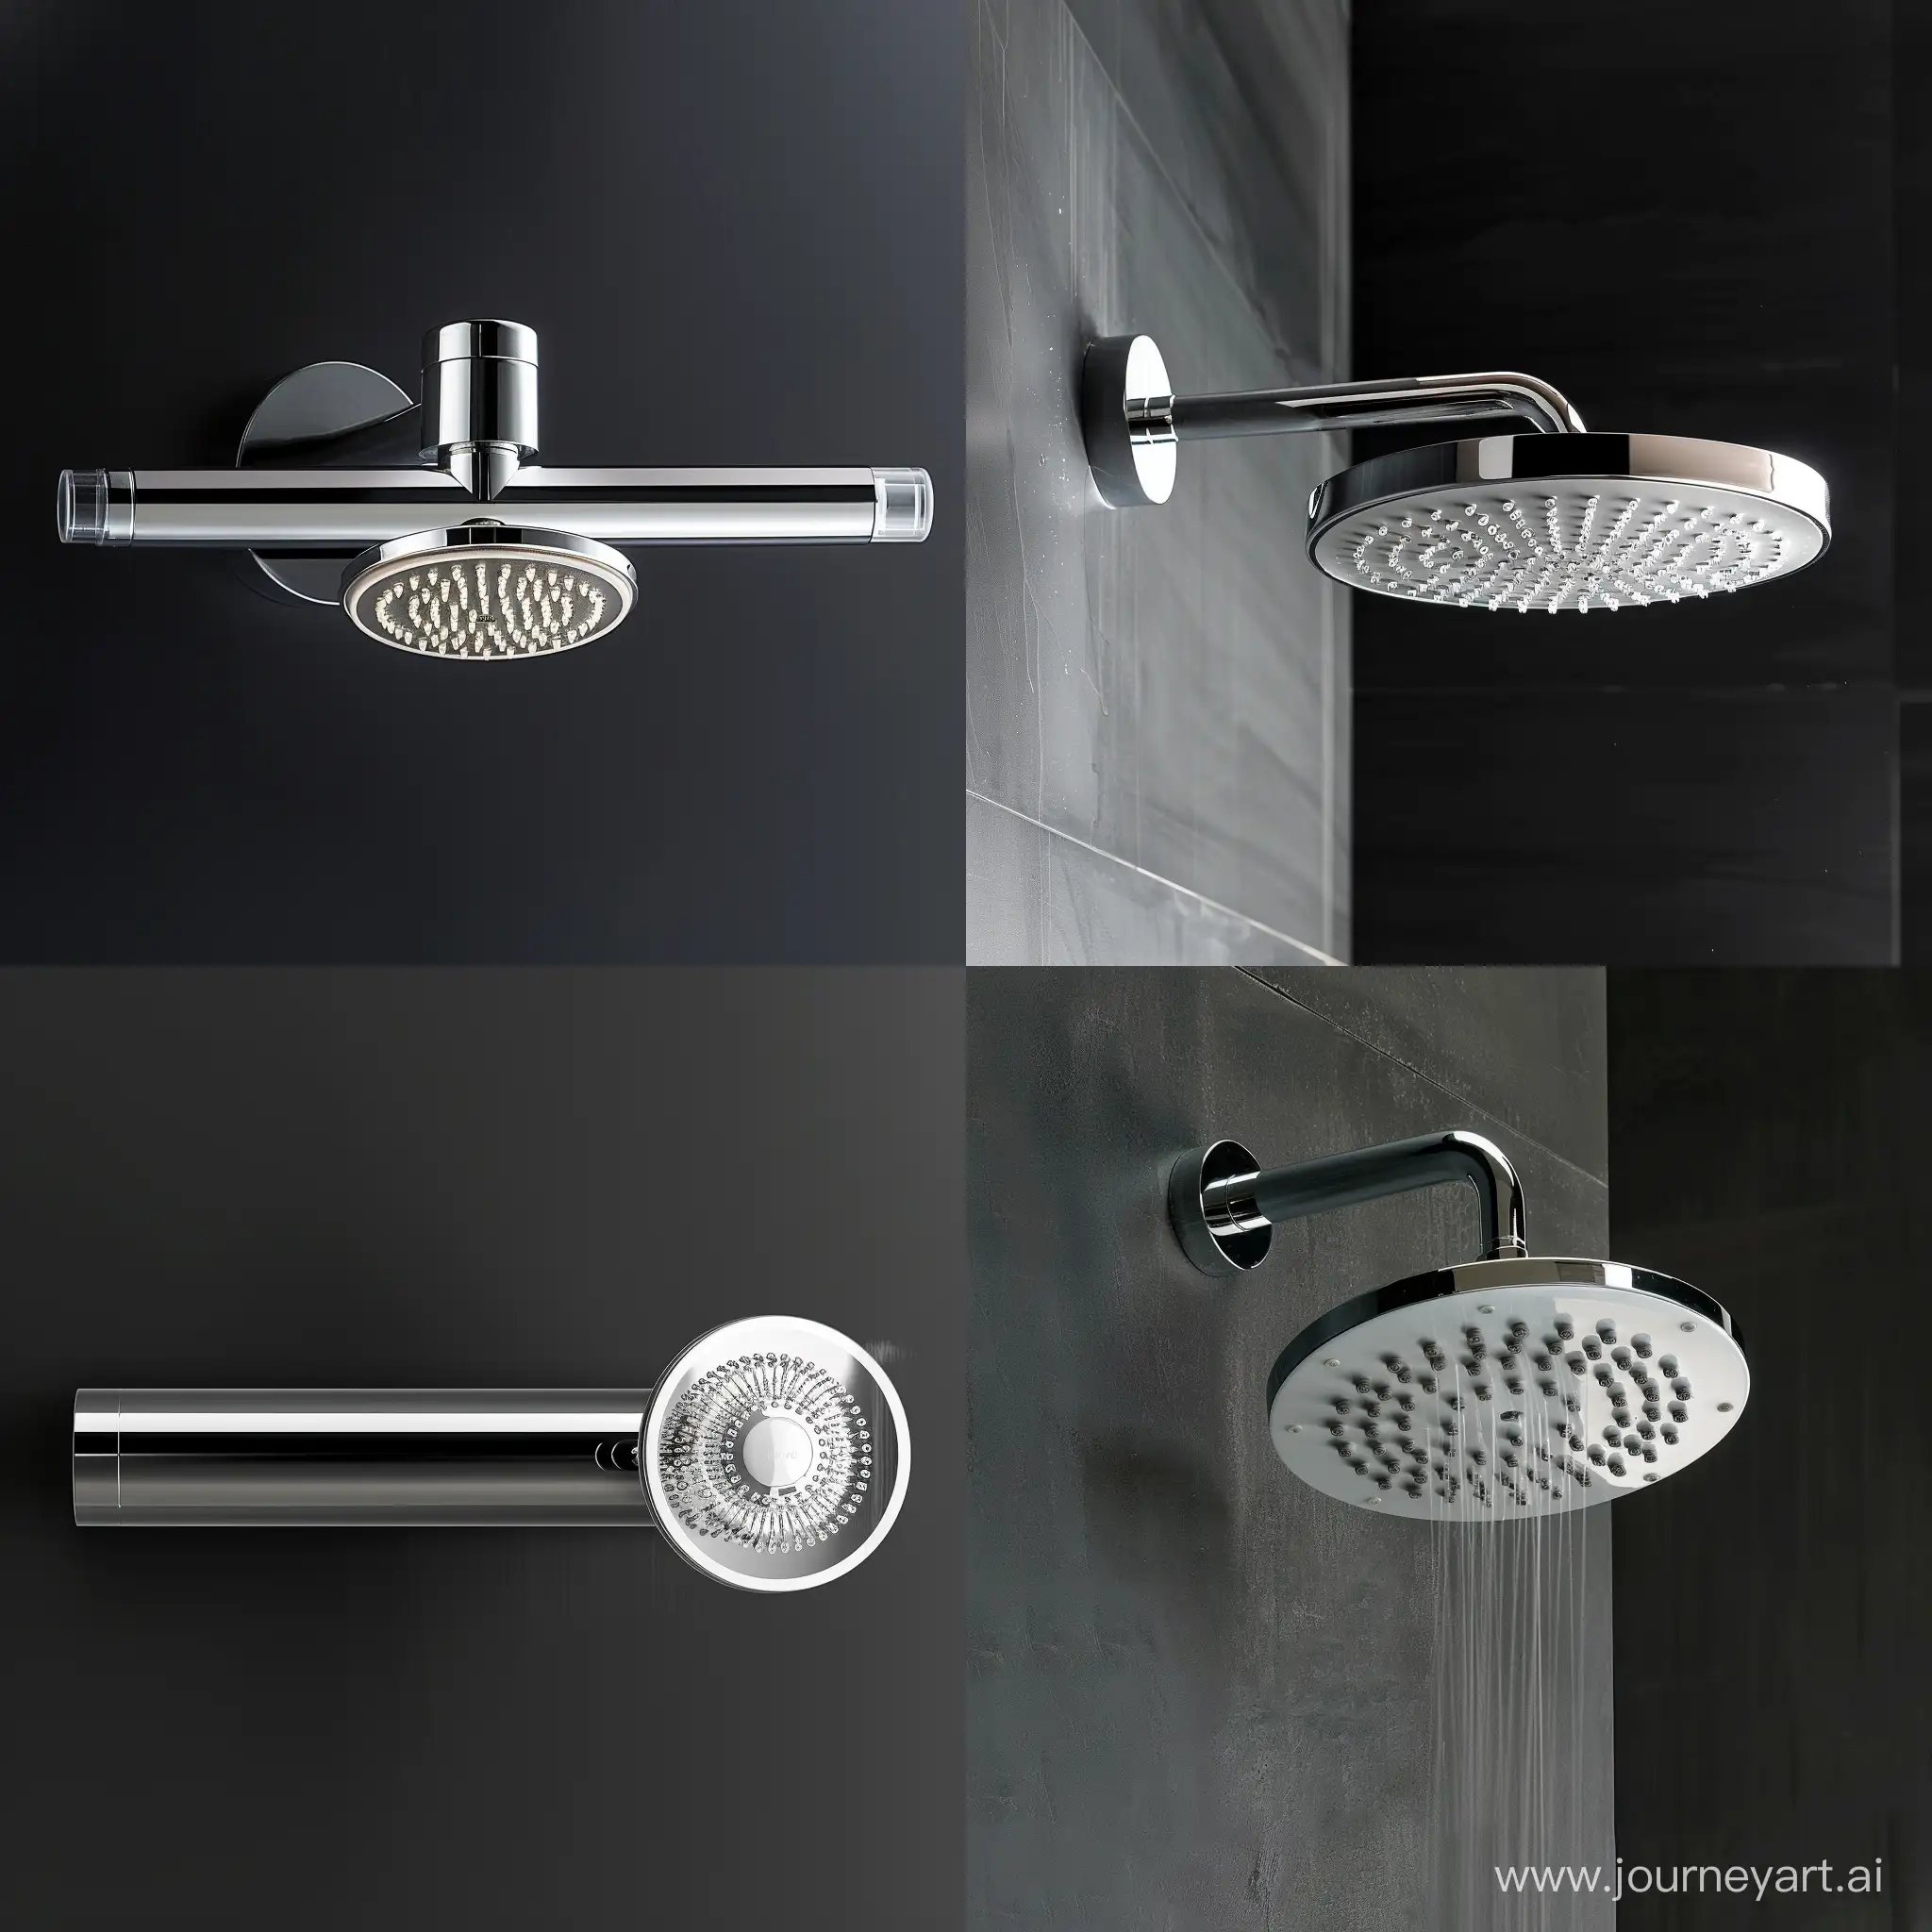 "Picture an eco-friendly showerhead, cylindrical in shape with a wide face, crafted from chrome-finished recycled metals and silicone nozzles. It's 25 cm in length with a shower face diameter of 10 cm, featuring a chrome body and transparent silicone parts. The design is modern and intuitive, with no lighting to maintain visual simplicity, emphasizing water conservation in a sleek, contemporary bathroom setting."realistic style